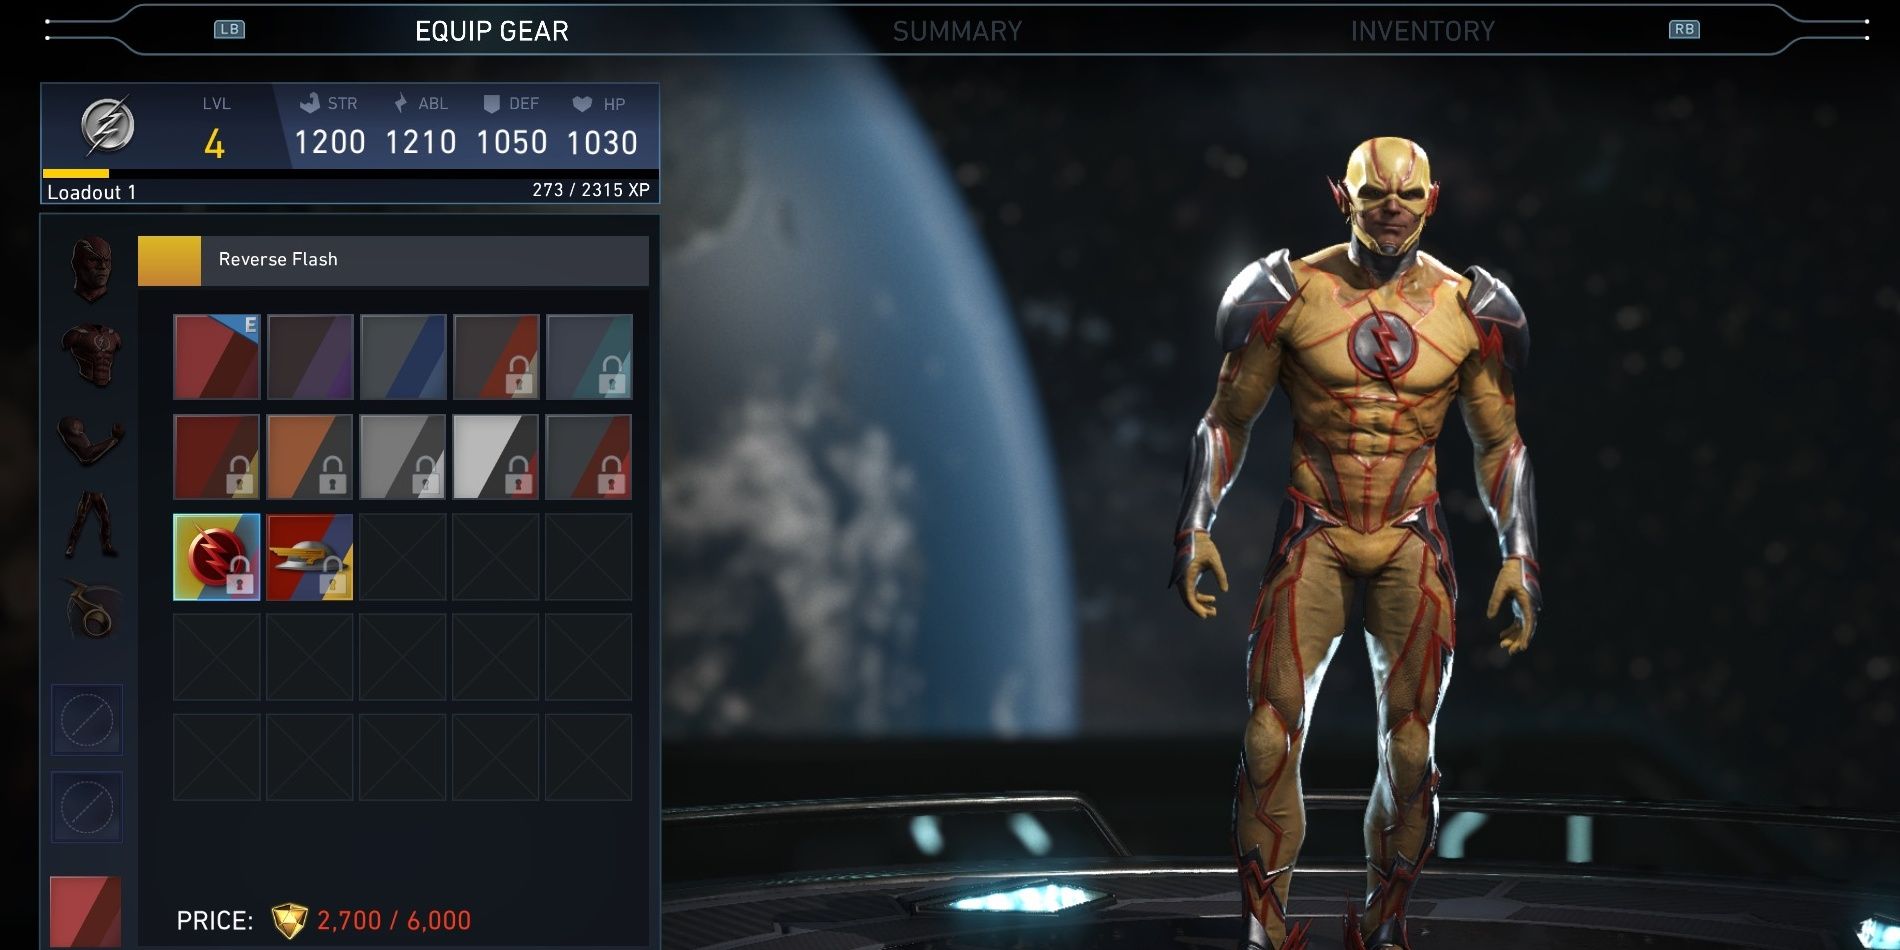 Reverse Flash can't change his look in Injustice 2